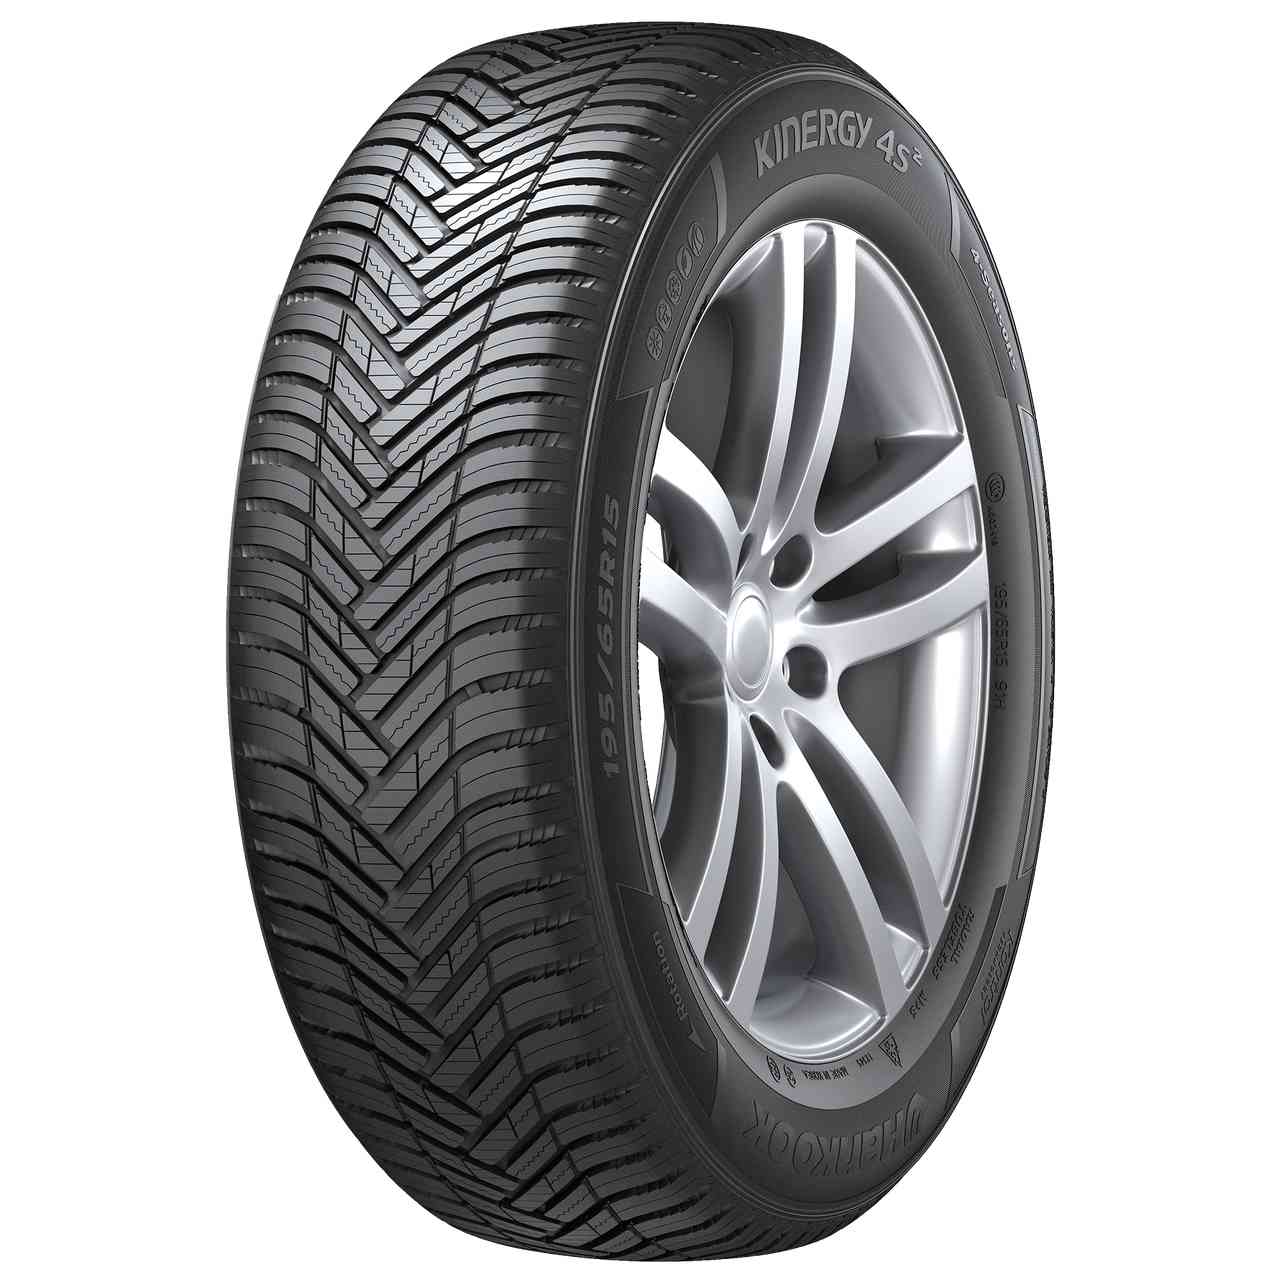 HANKOOK KINERGY 4S 2 (H750) 245/45R18 100Y BSW XL